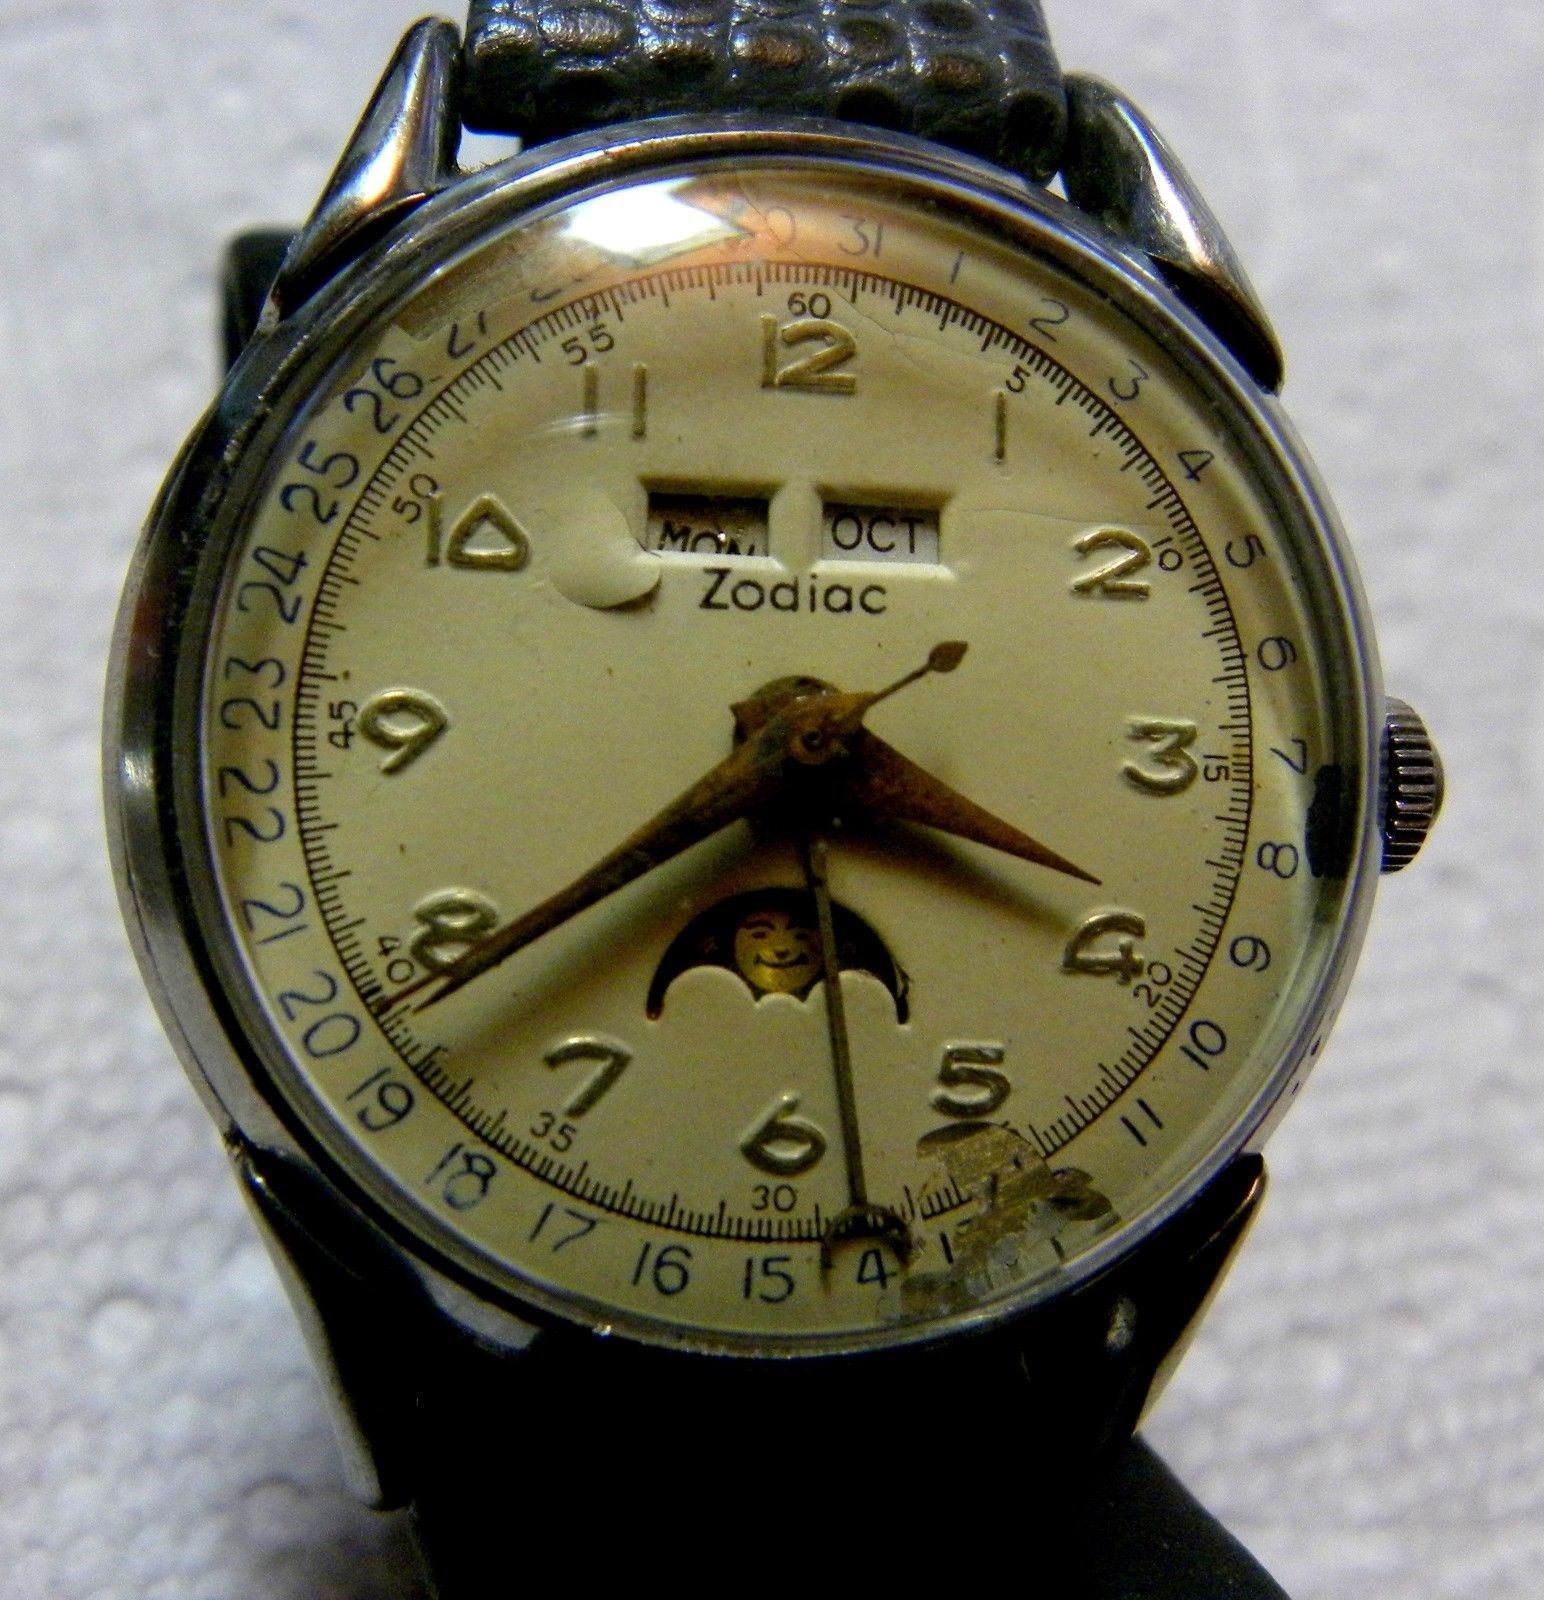 Details About Zodiac Moon Phase Triple Date Vintage Watch | Calendar Zodiac Triple Calendar Moonphase